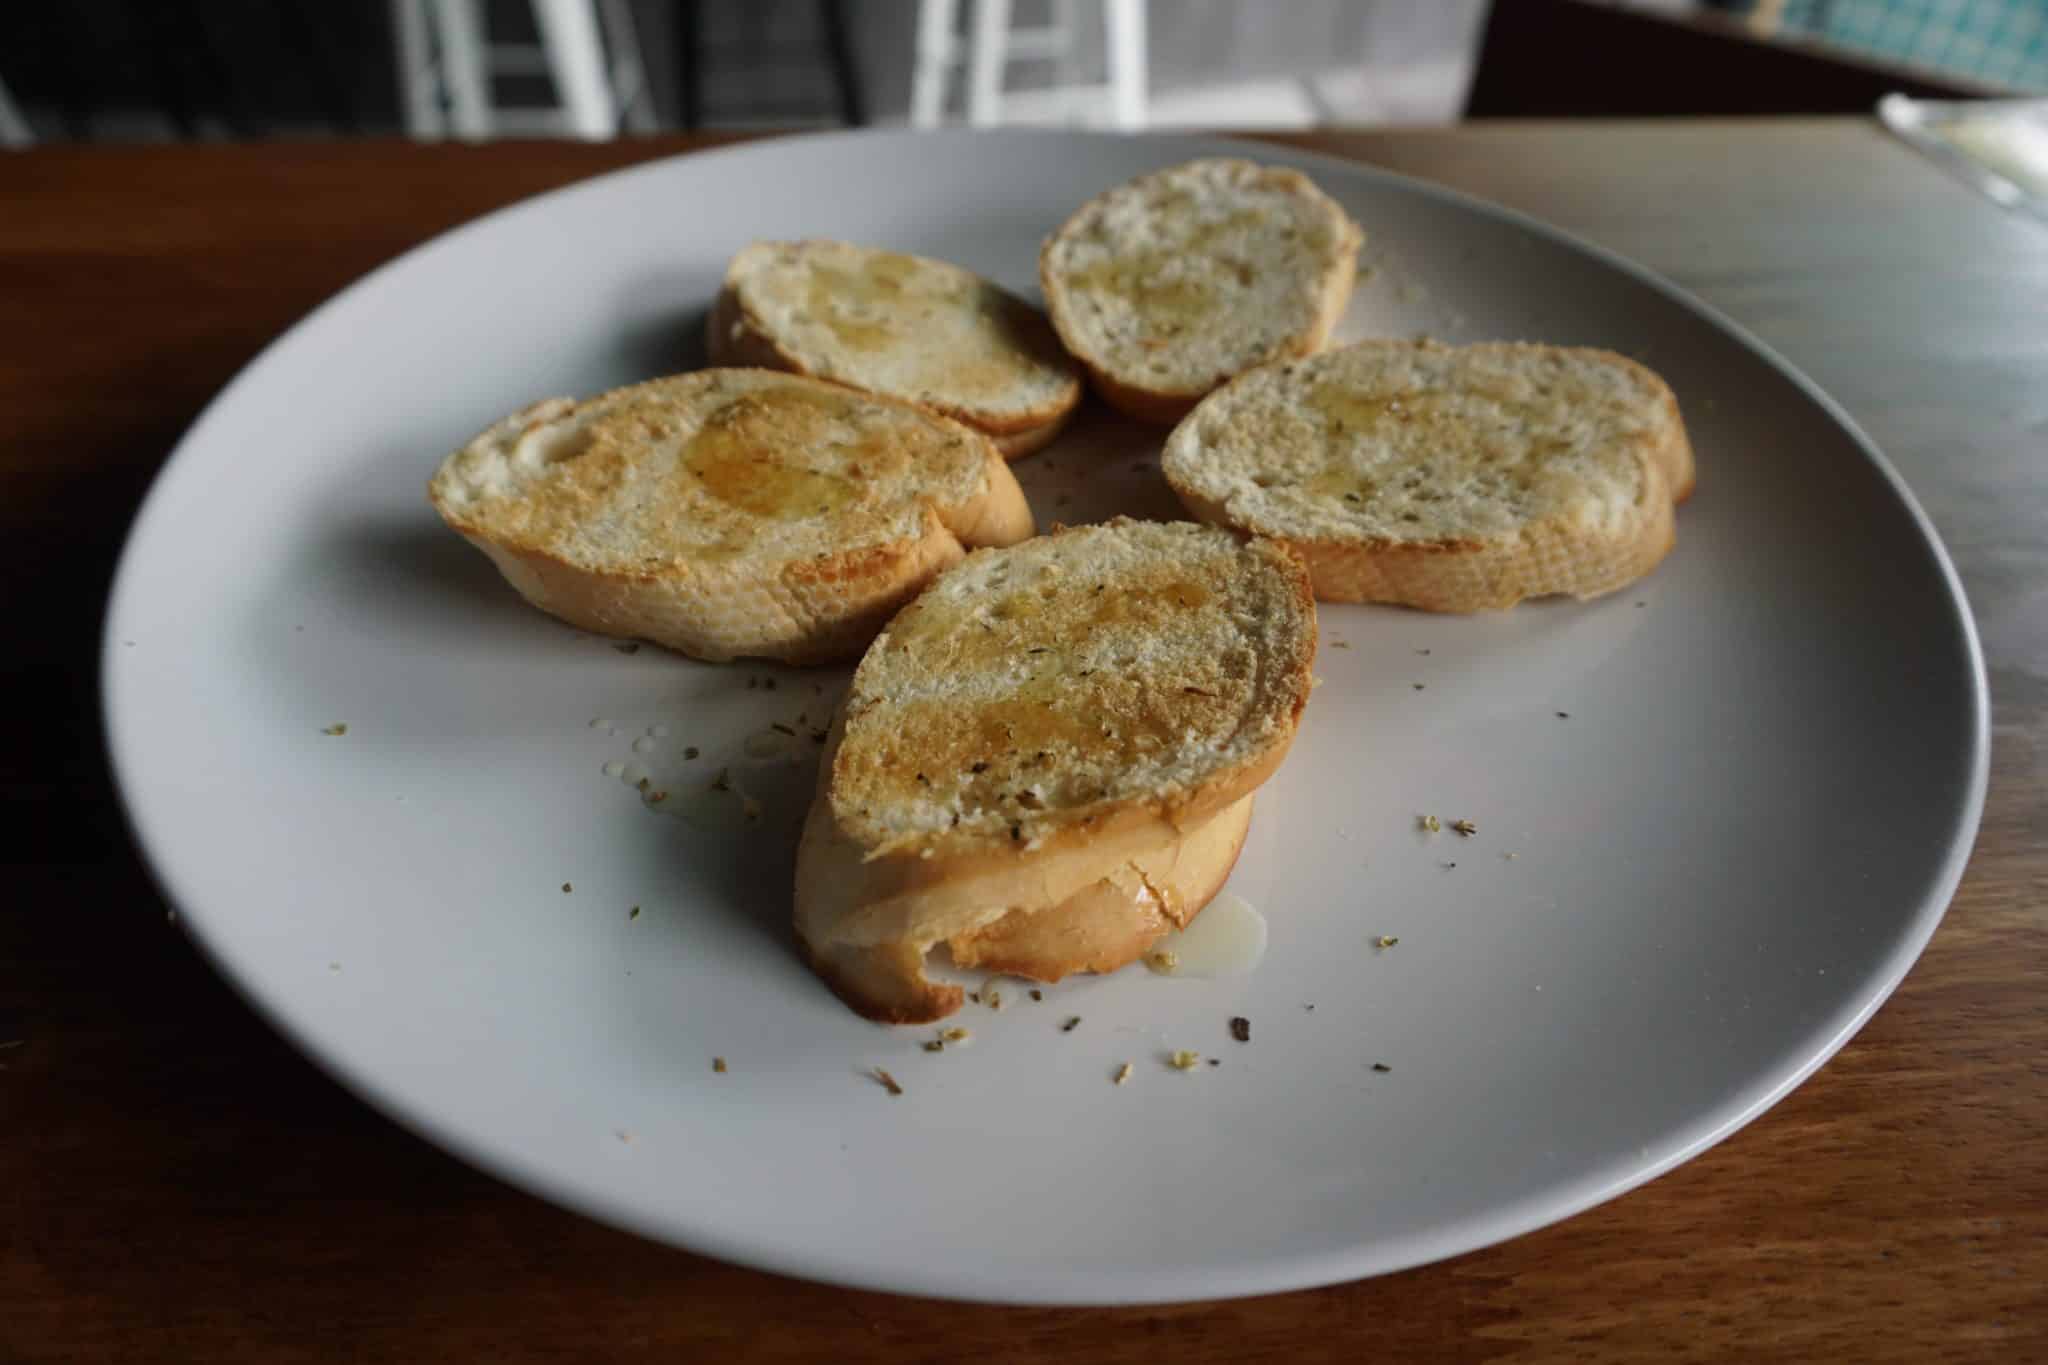 Five slices of rustic garlic bread on a plain white plate